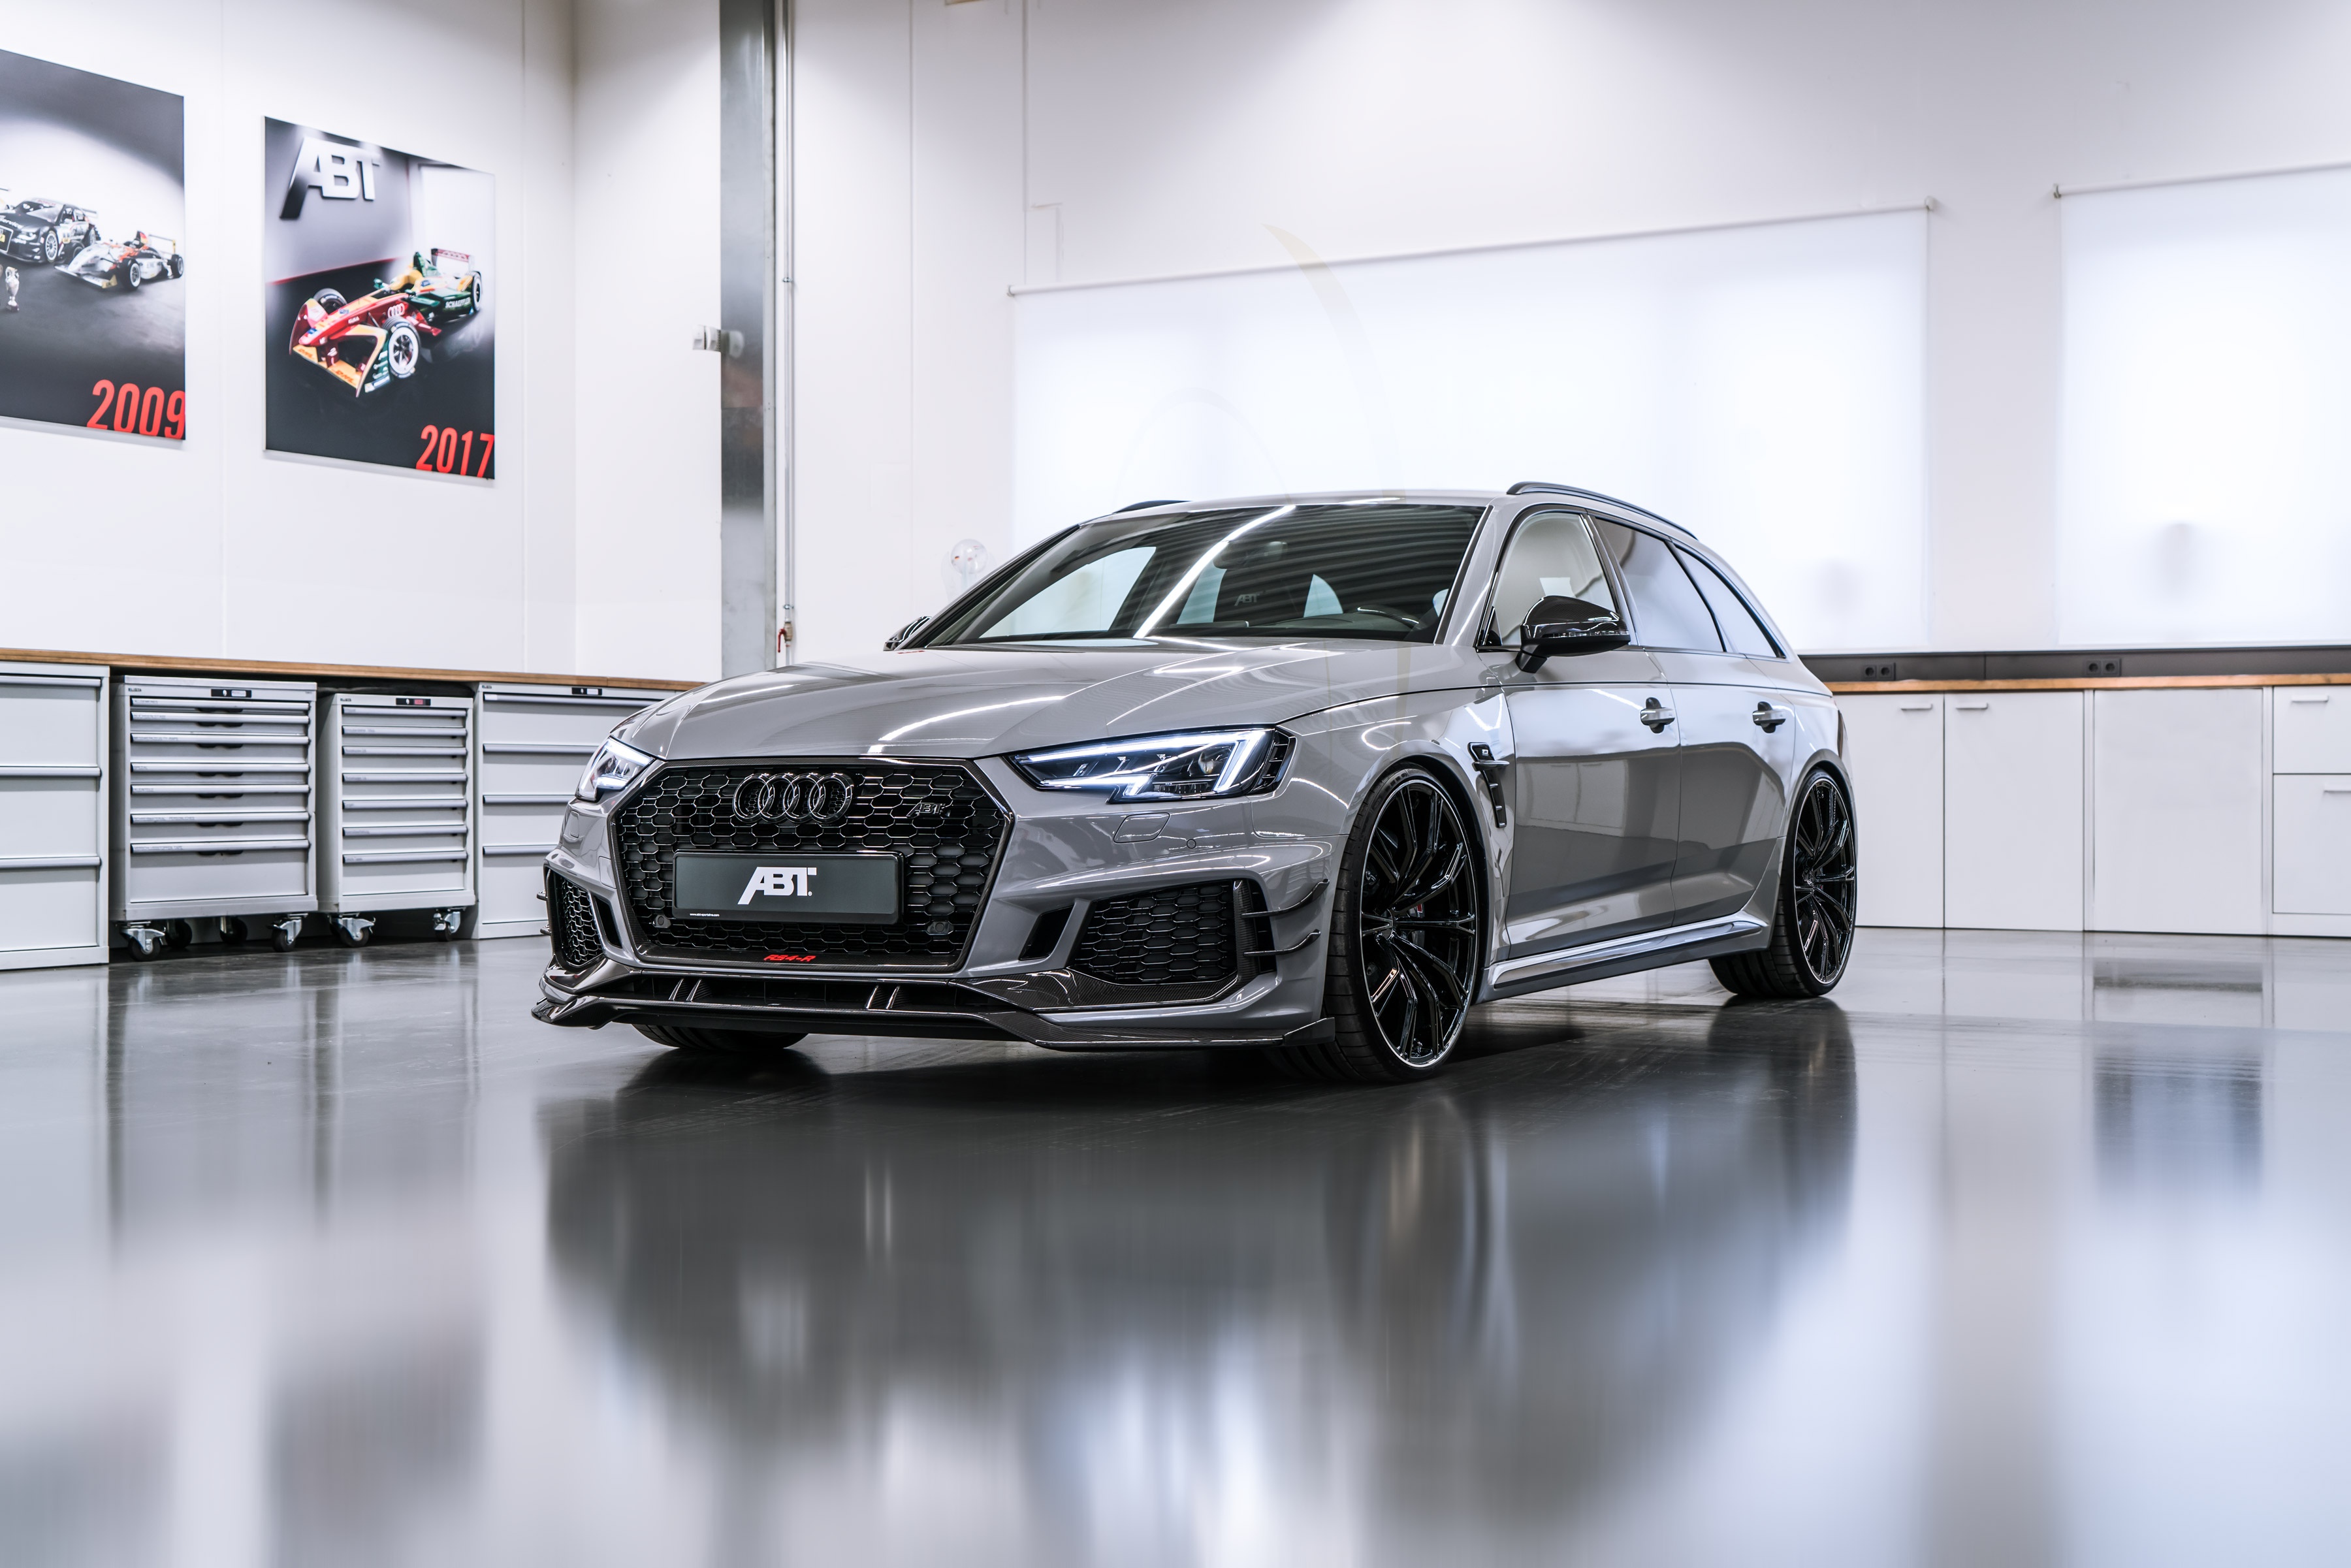 General 3600x2401 car Audi ABT Audi RS4 reflection frontal view station wagon German cars Volkswagen Group